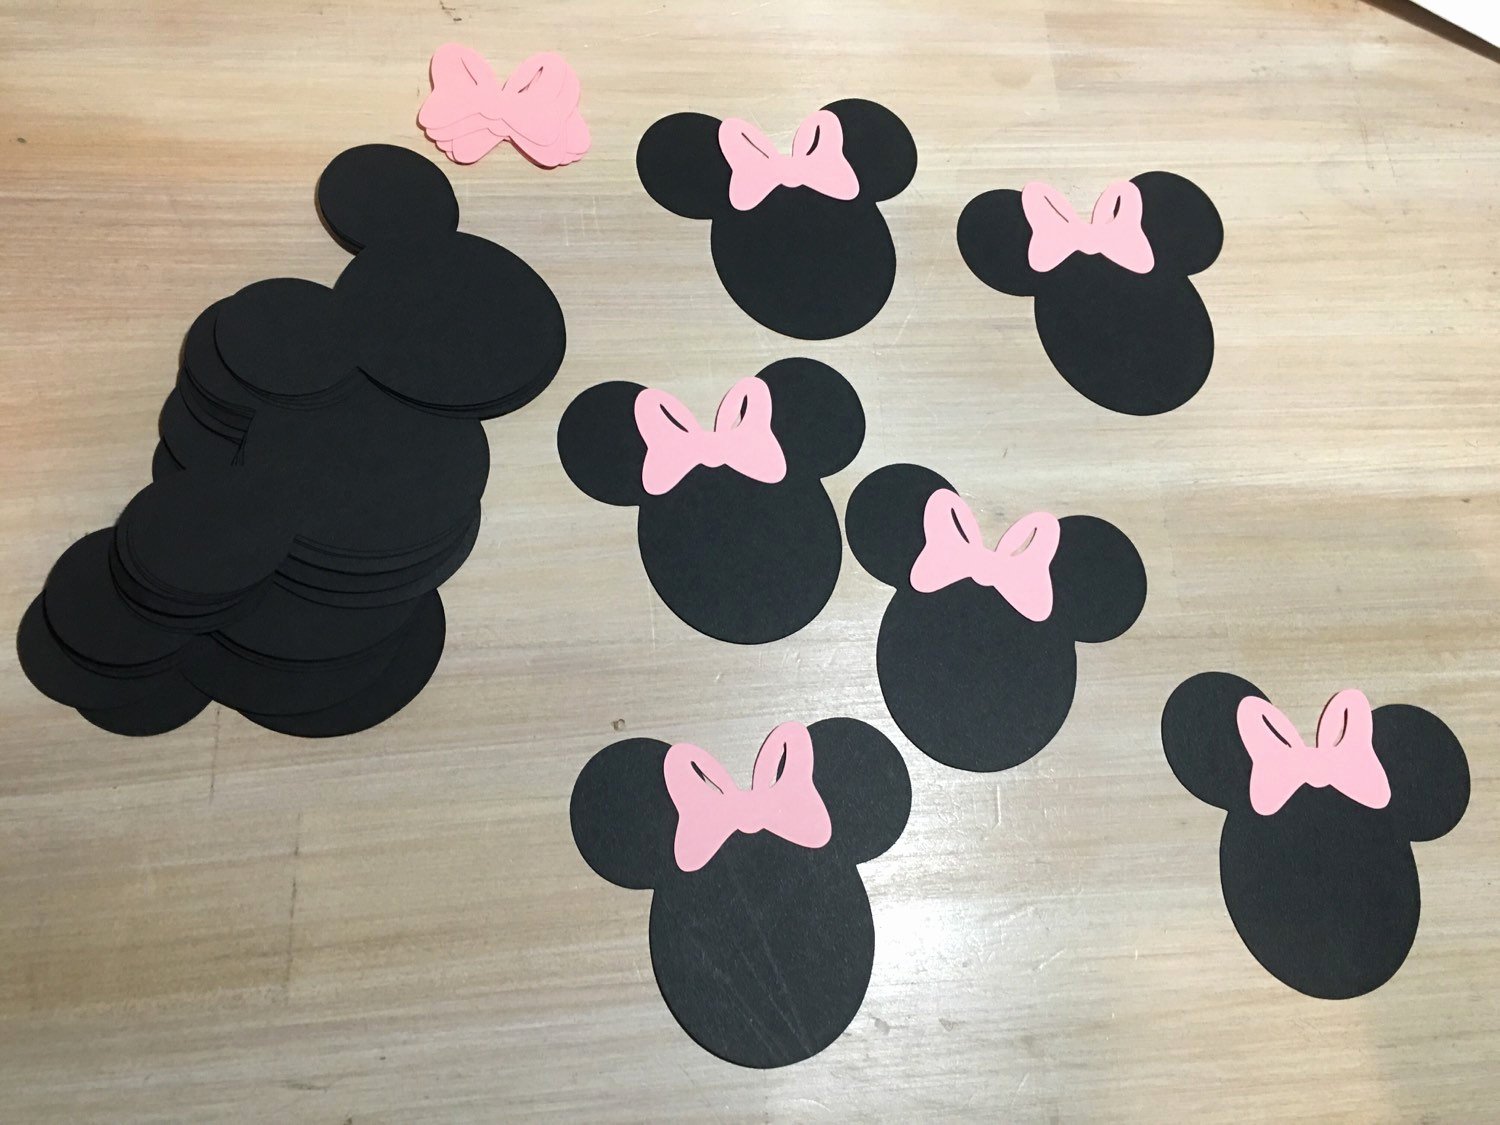 Minnie Mouse Ears Cut Out Luxury Minnie Mouse Paper Cut Outs 3 Inches Set Of 20